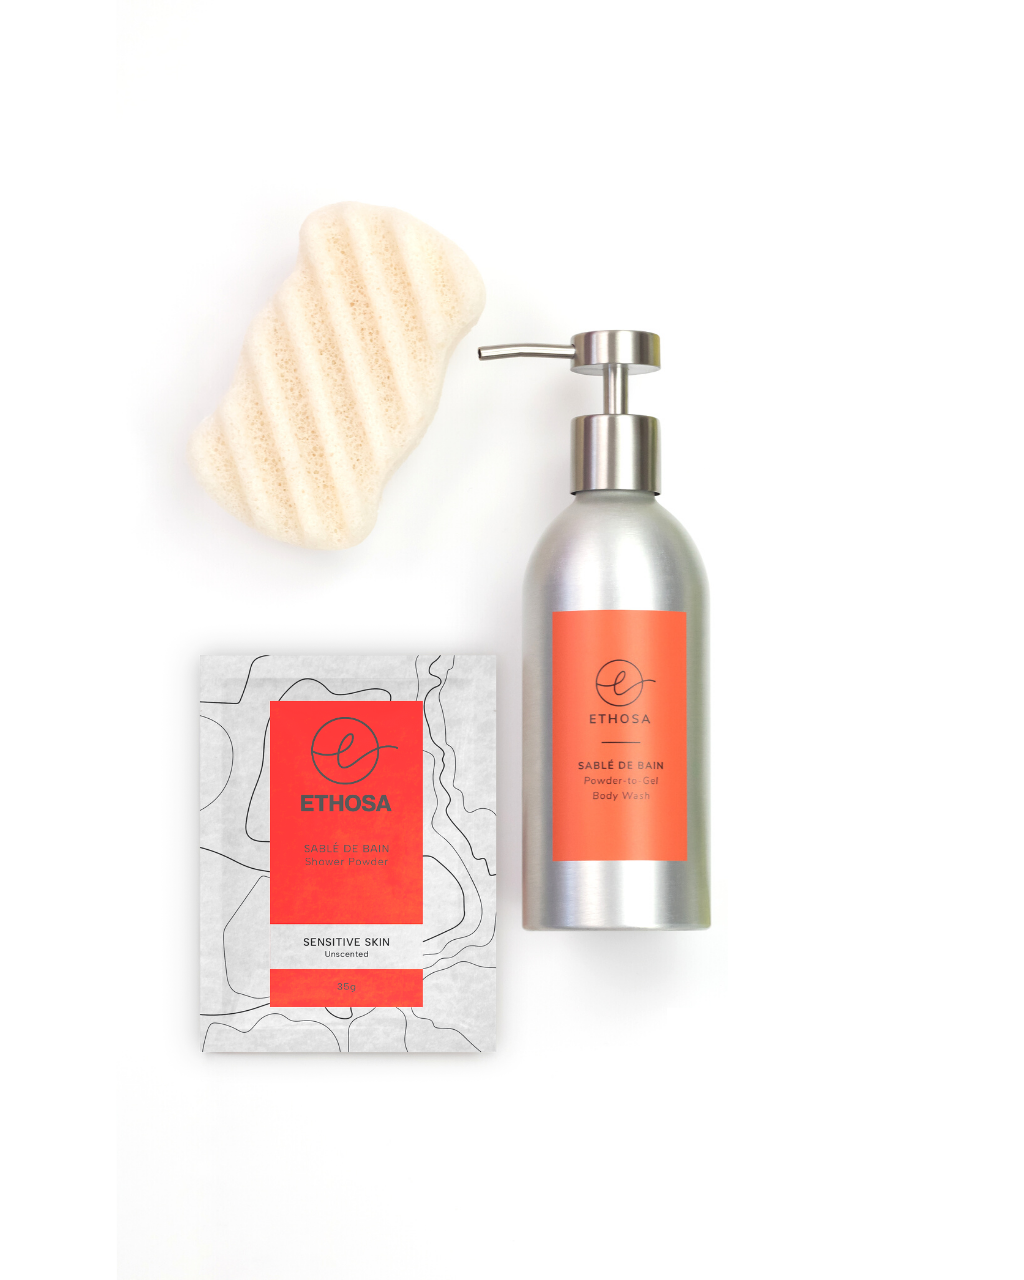 Product picture of Body Wash Starter Kit - Sensitive Skin